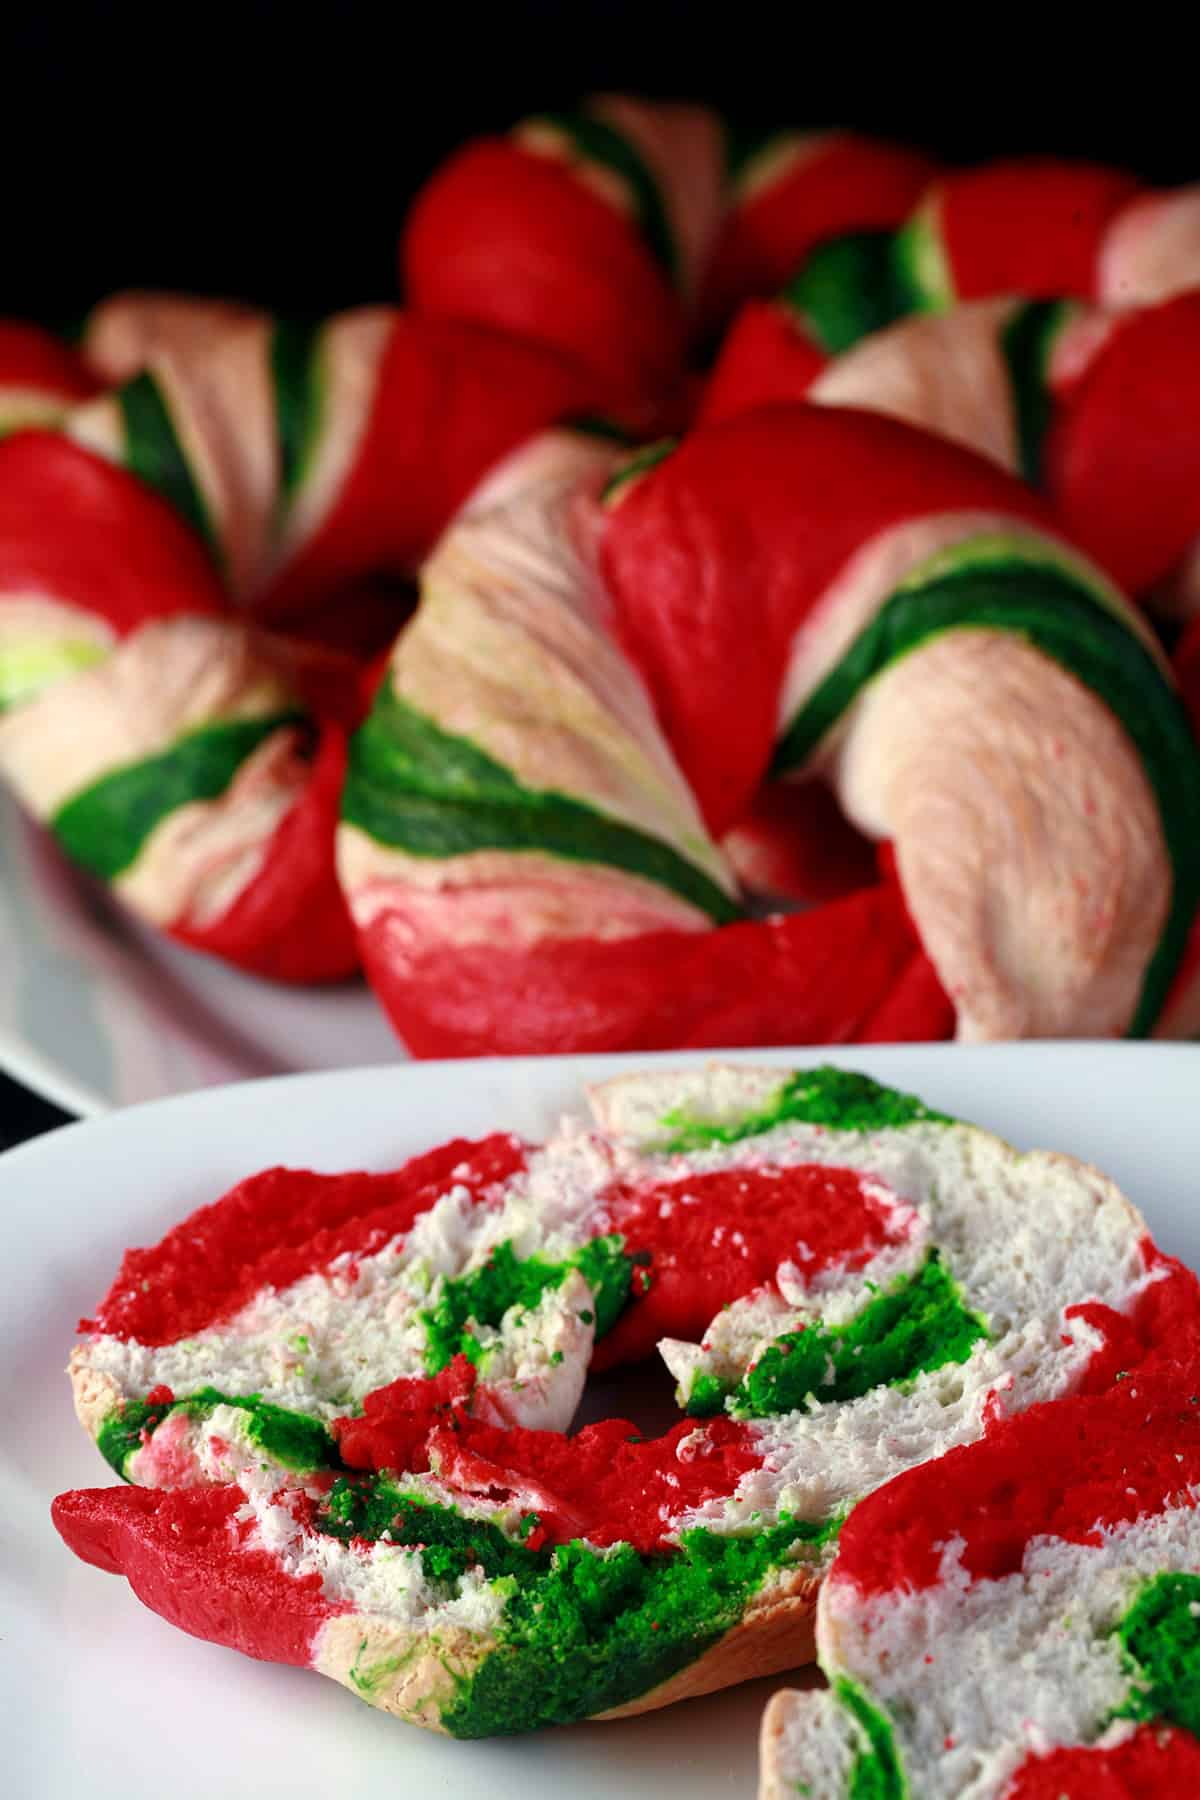 Several candy cane style Christmas bagels, with a cut one on a plate.